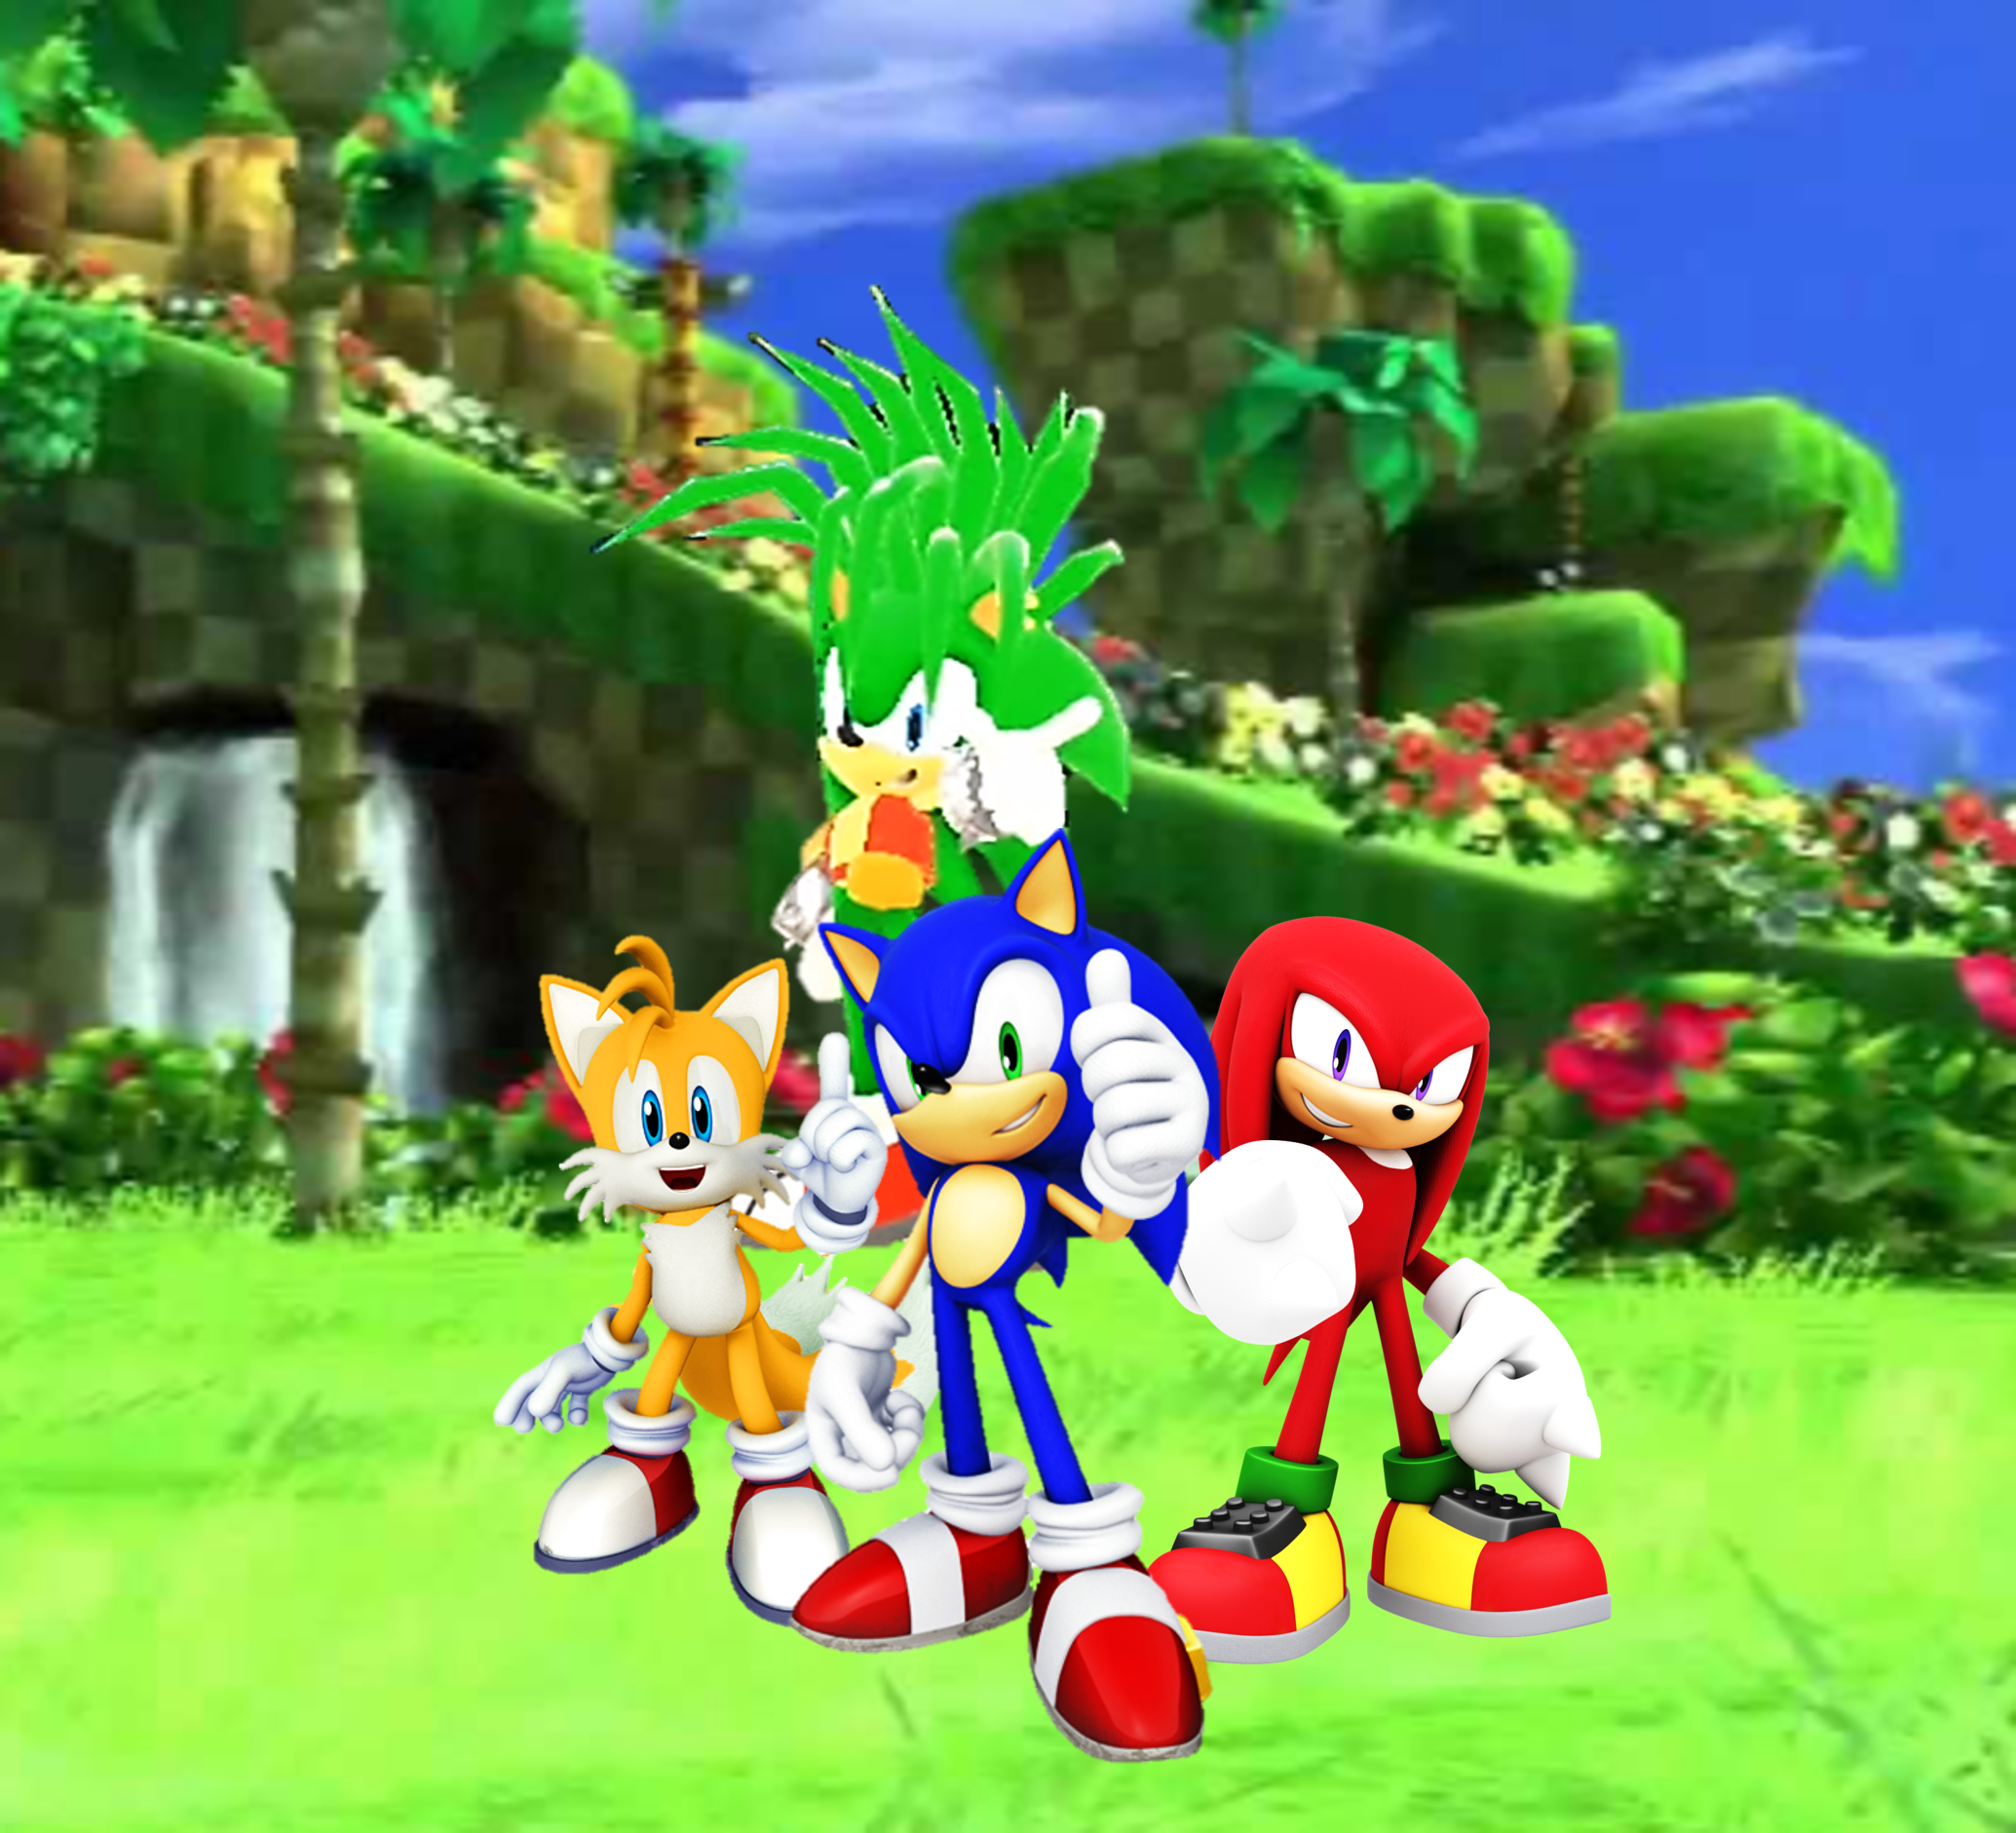 Sonic The Hedgehog Image Tails Knuckles And His Brother